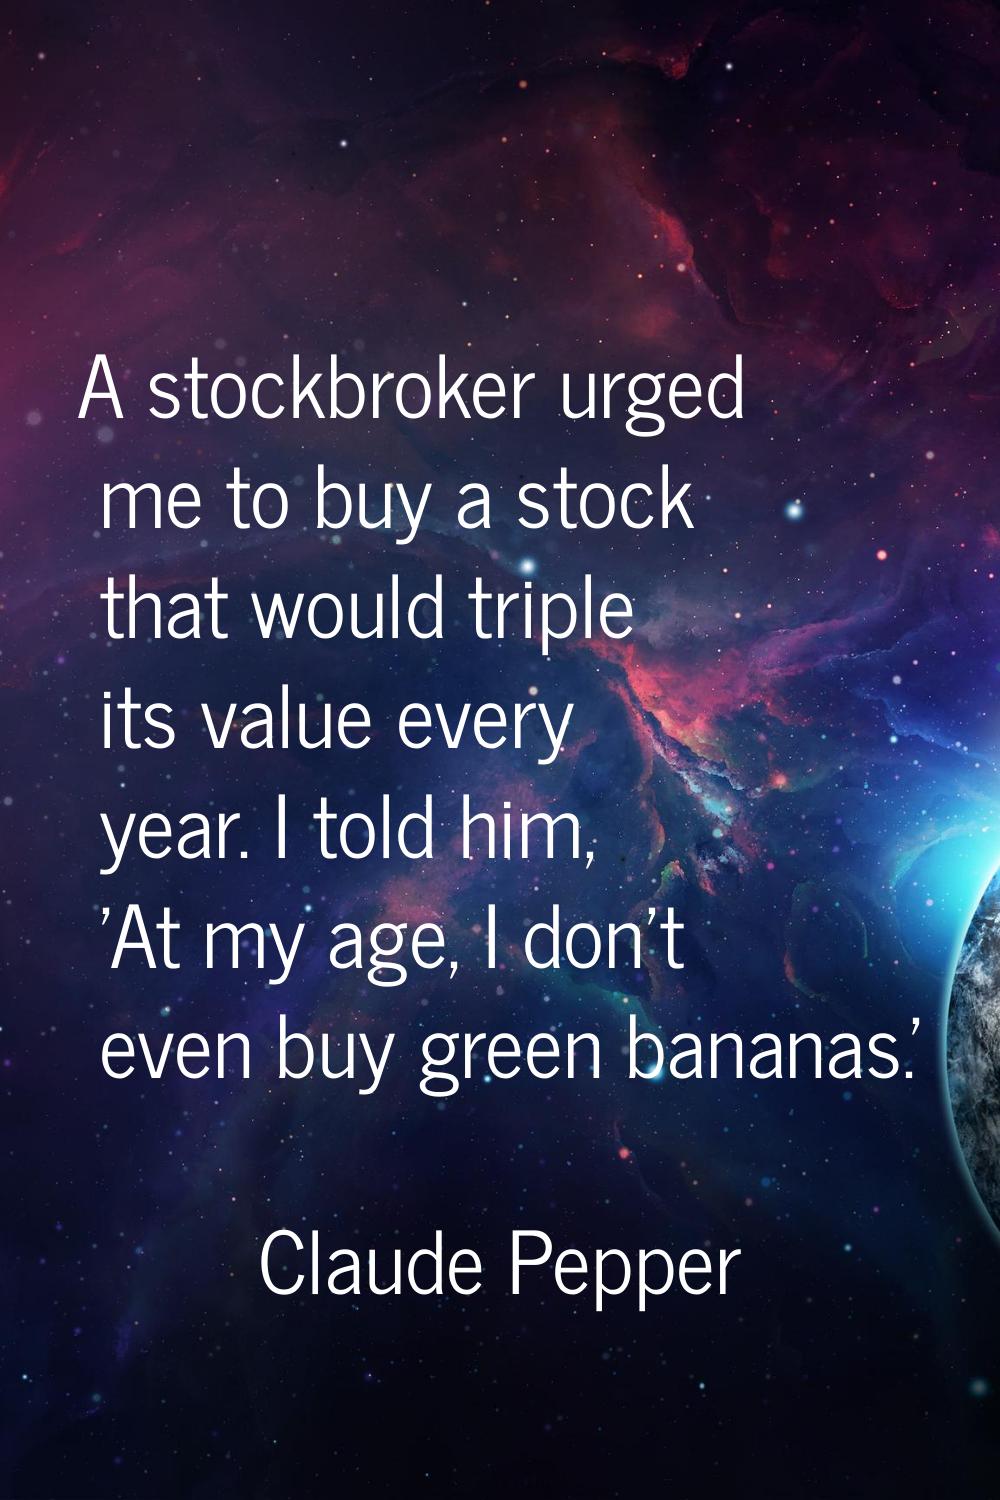 A stockbroker urged me to buy a stock that would triple its value every year. I told him, 'At my ag